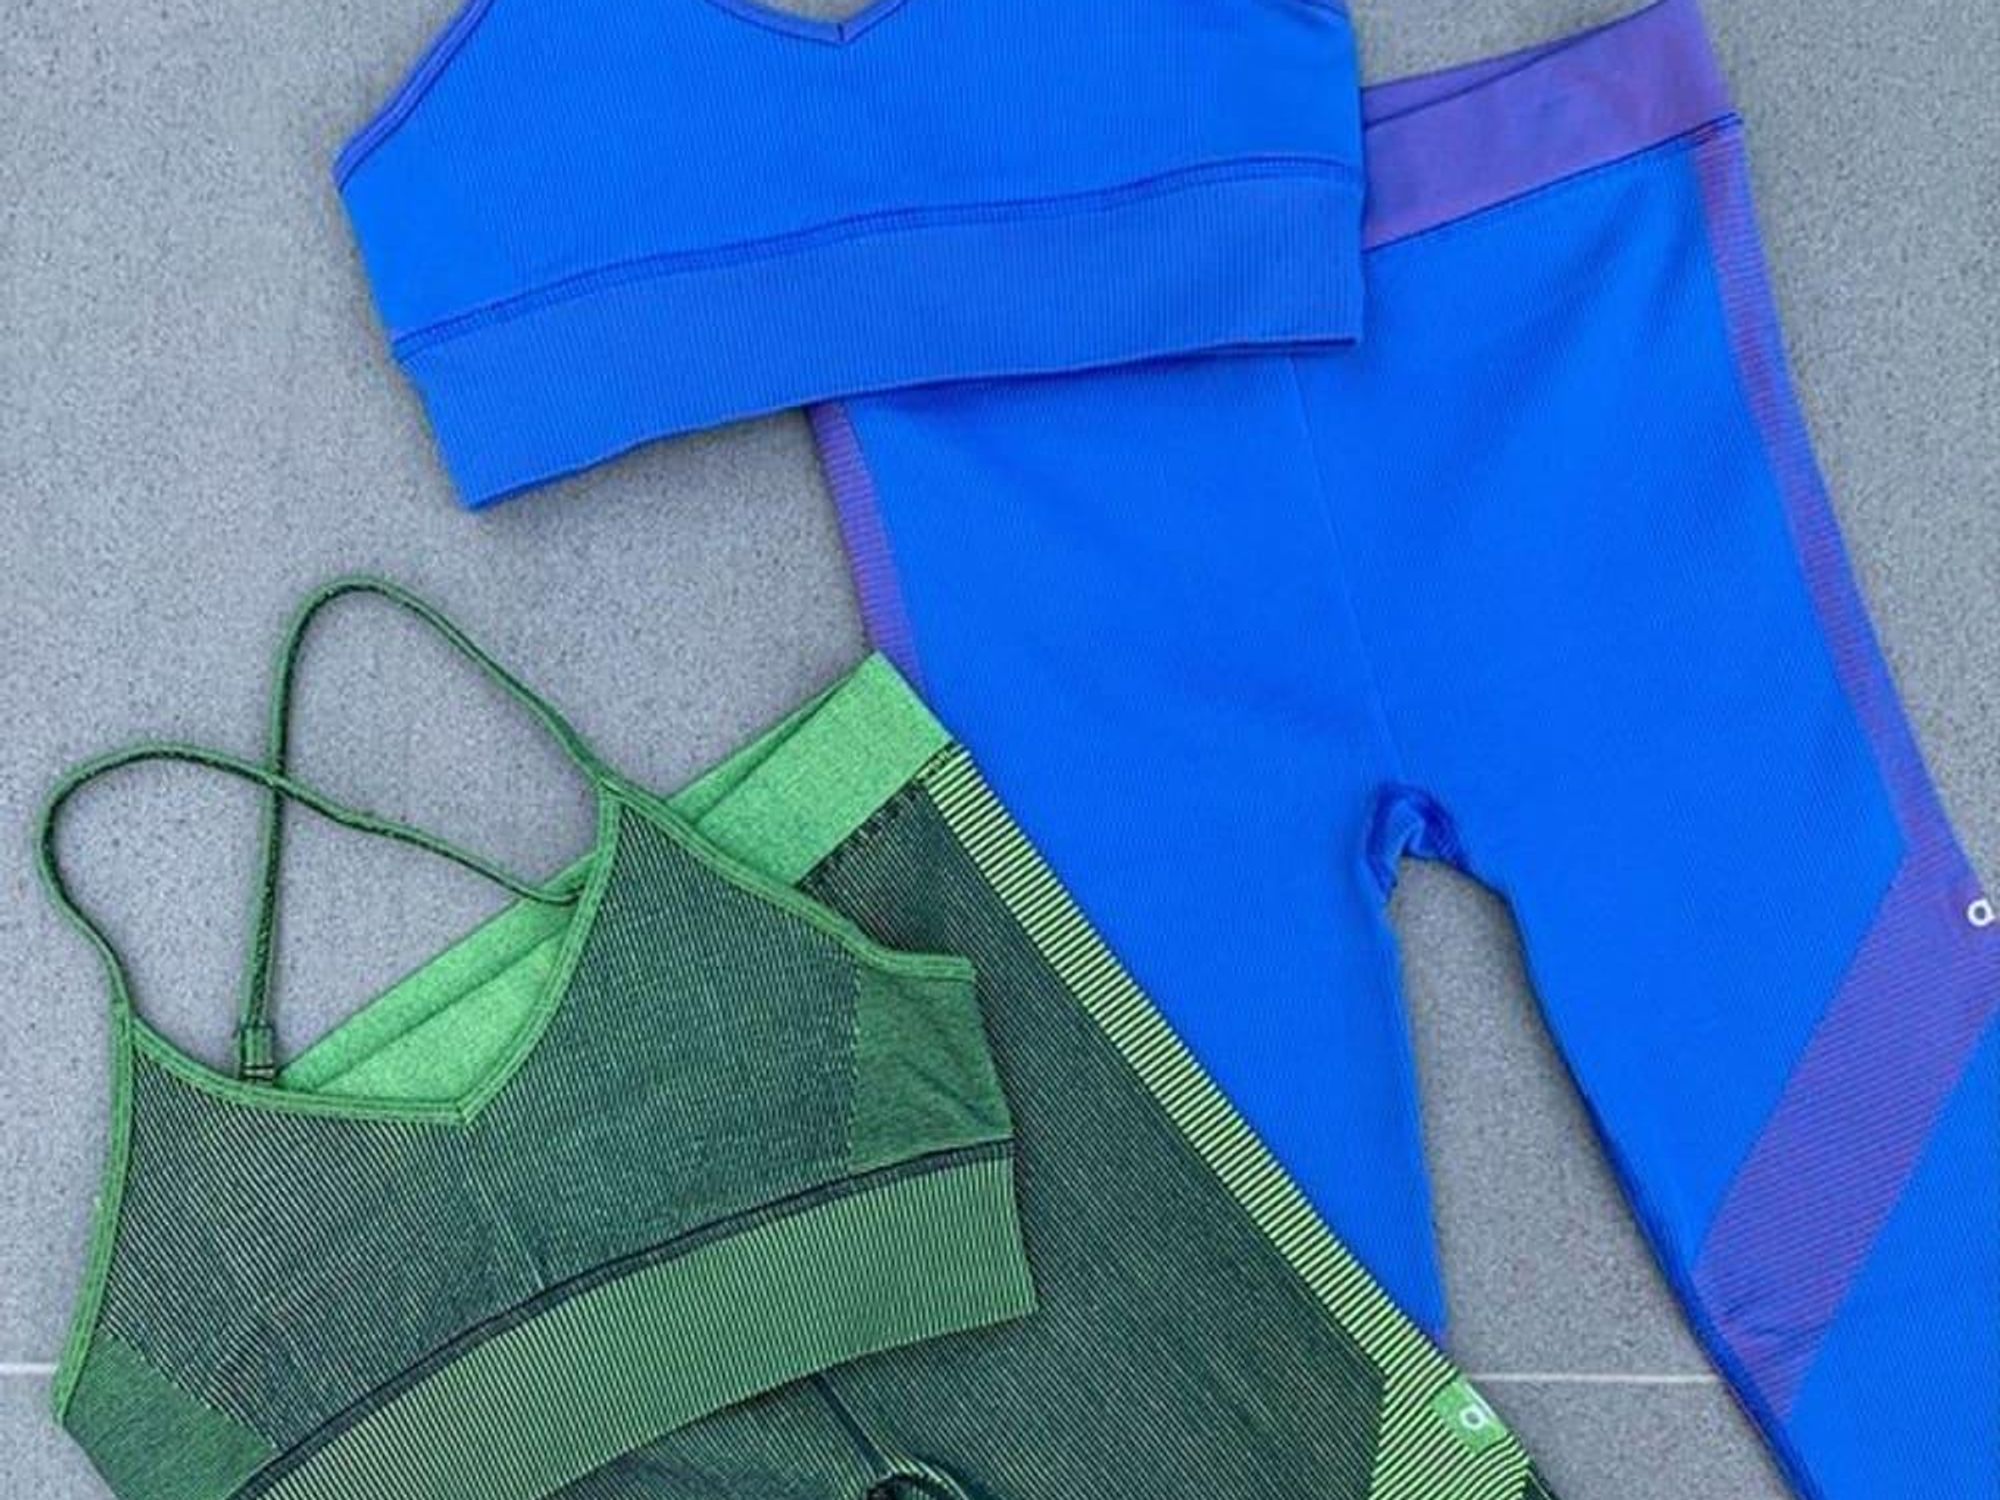 Fashionable California yoga brand extends its reach with first